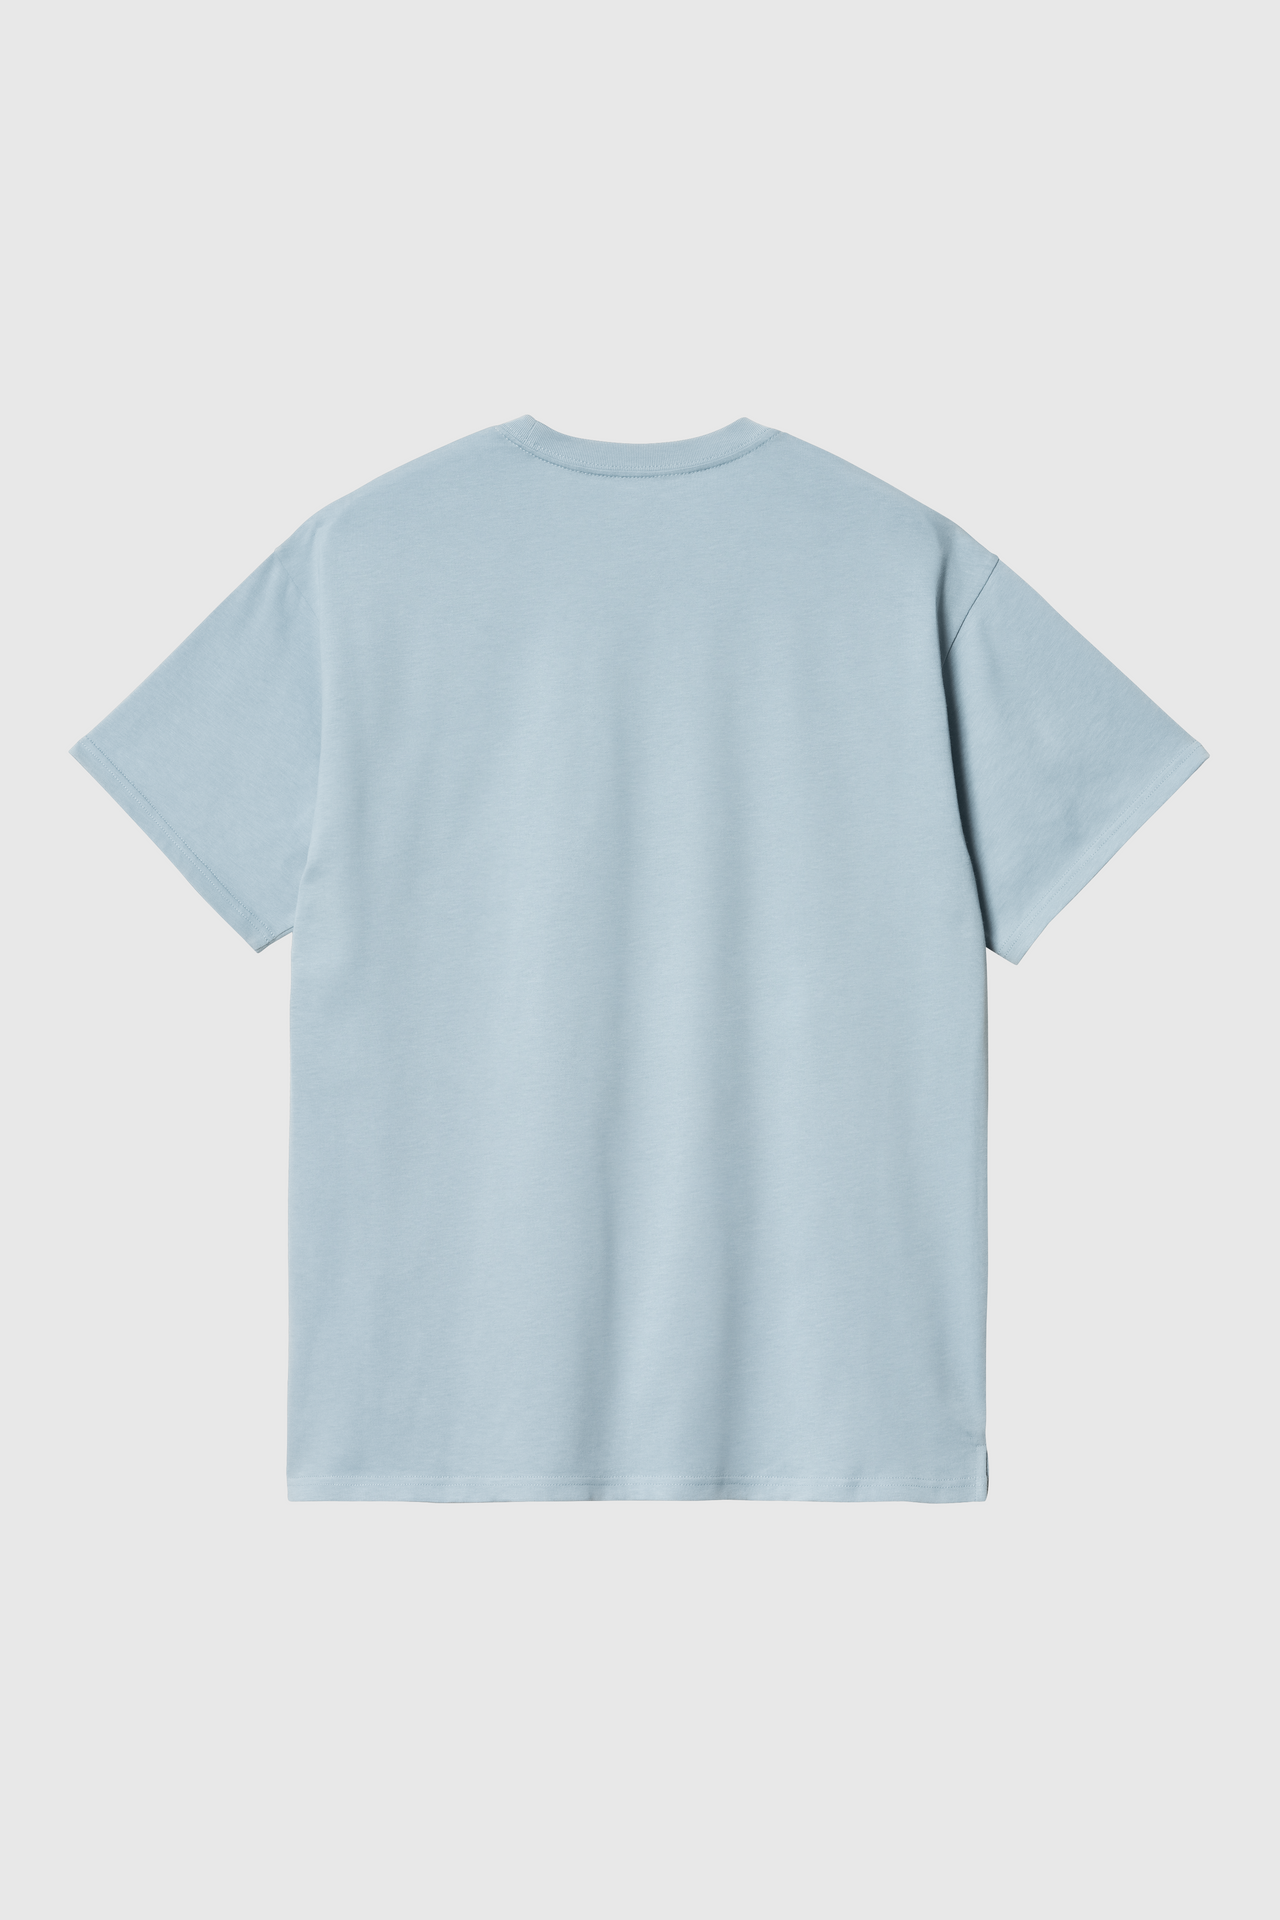 MADISON T-SHIRT FROSTED BLUE